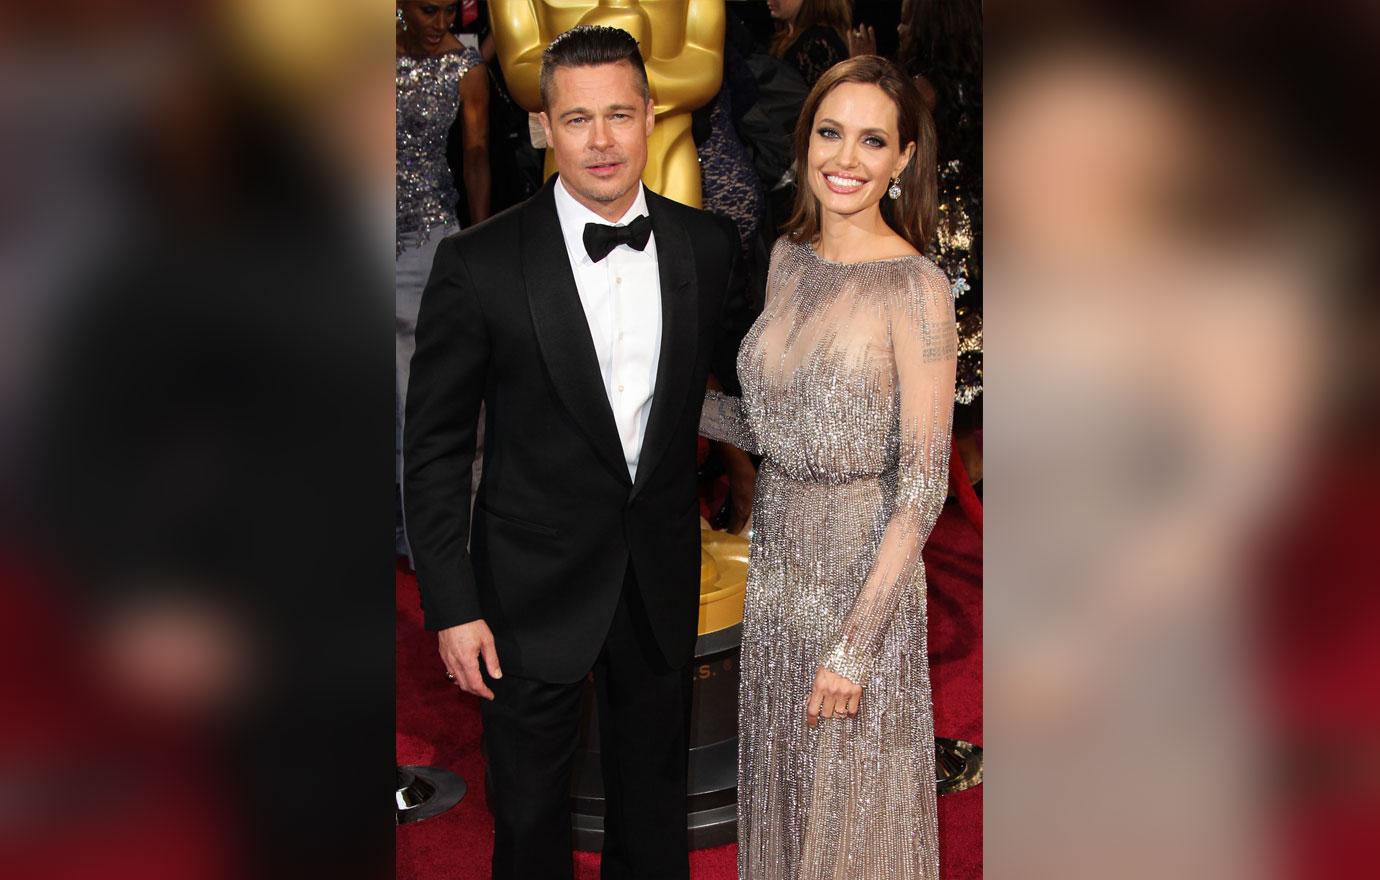 brad pitt convinced angelina jolie is drawing out custody battle until kids are of age #2